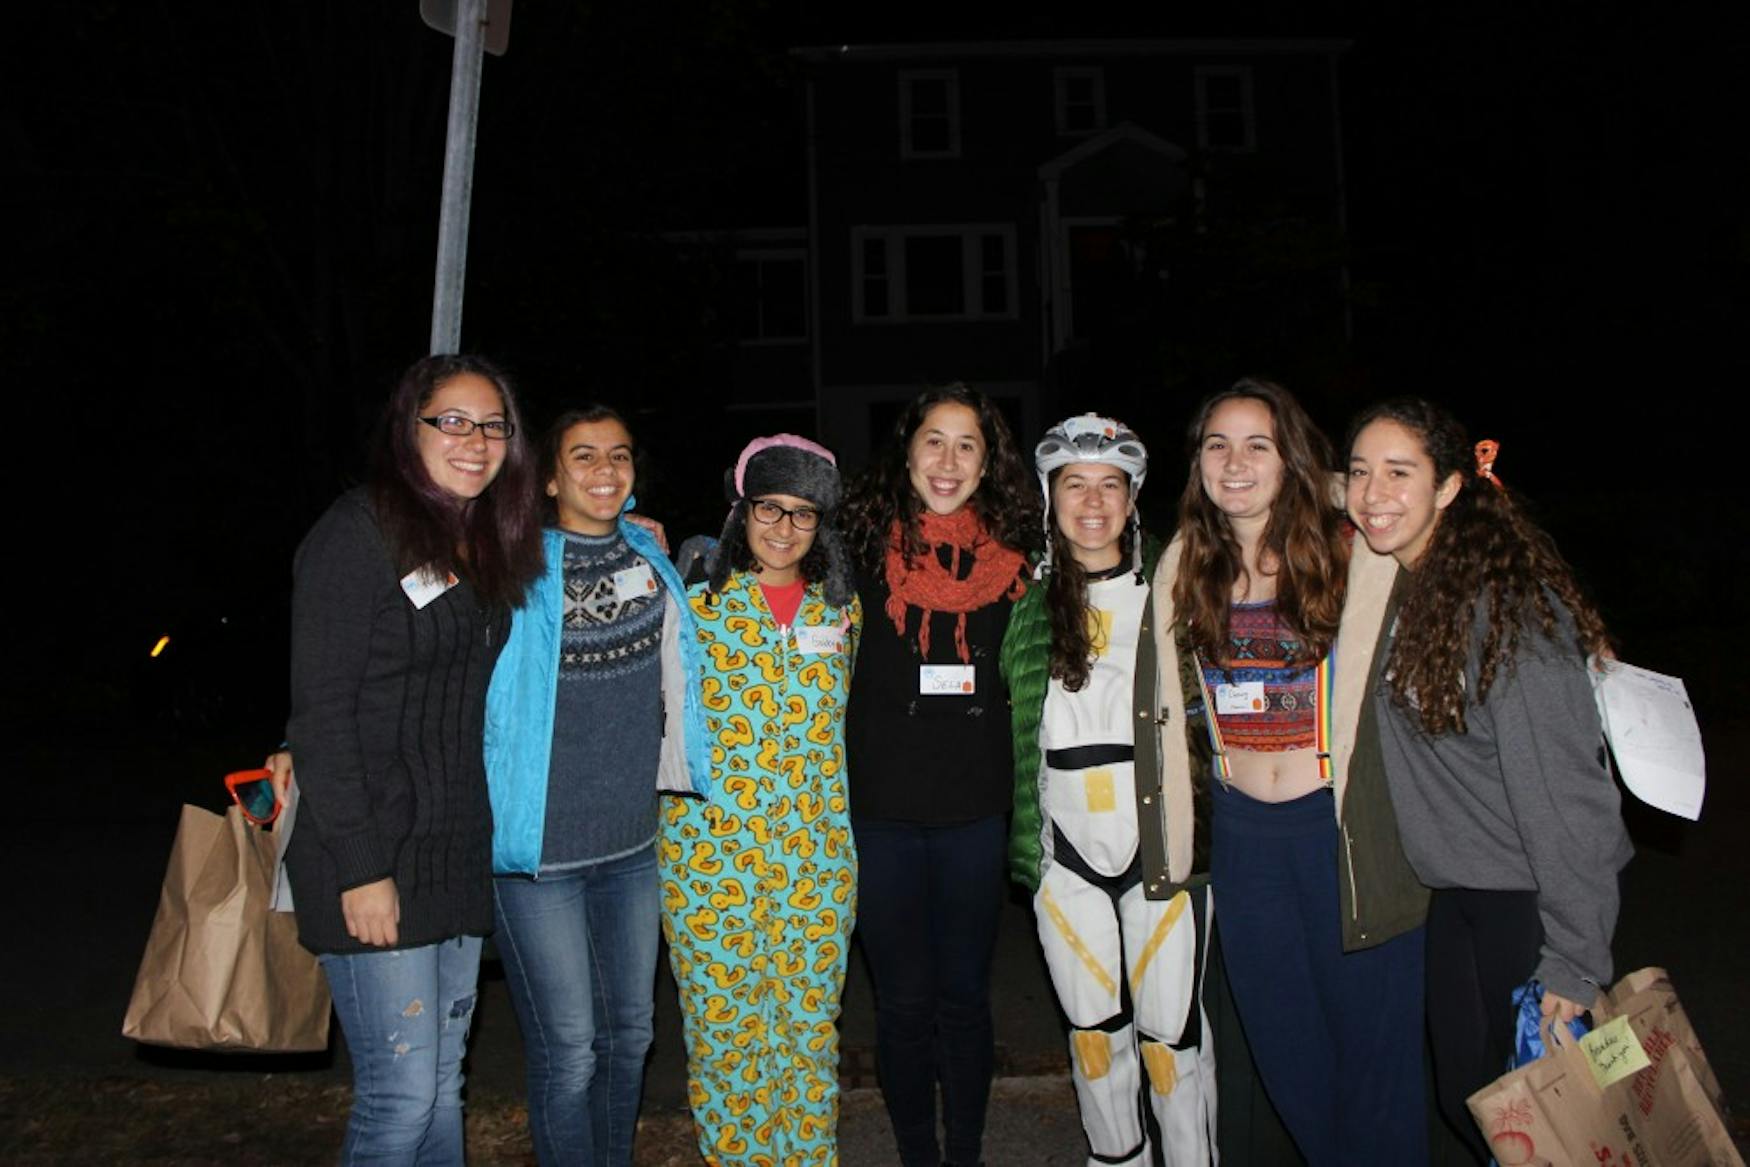 Brandeis Women’s Ultimate Frisbee Team participated in Halloween for the Hungry, going door-to-door collecting canned goods.